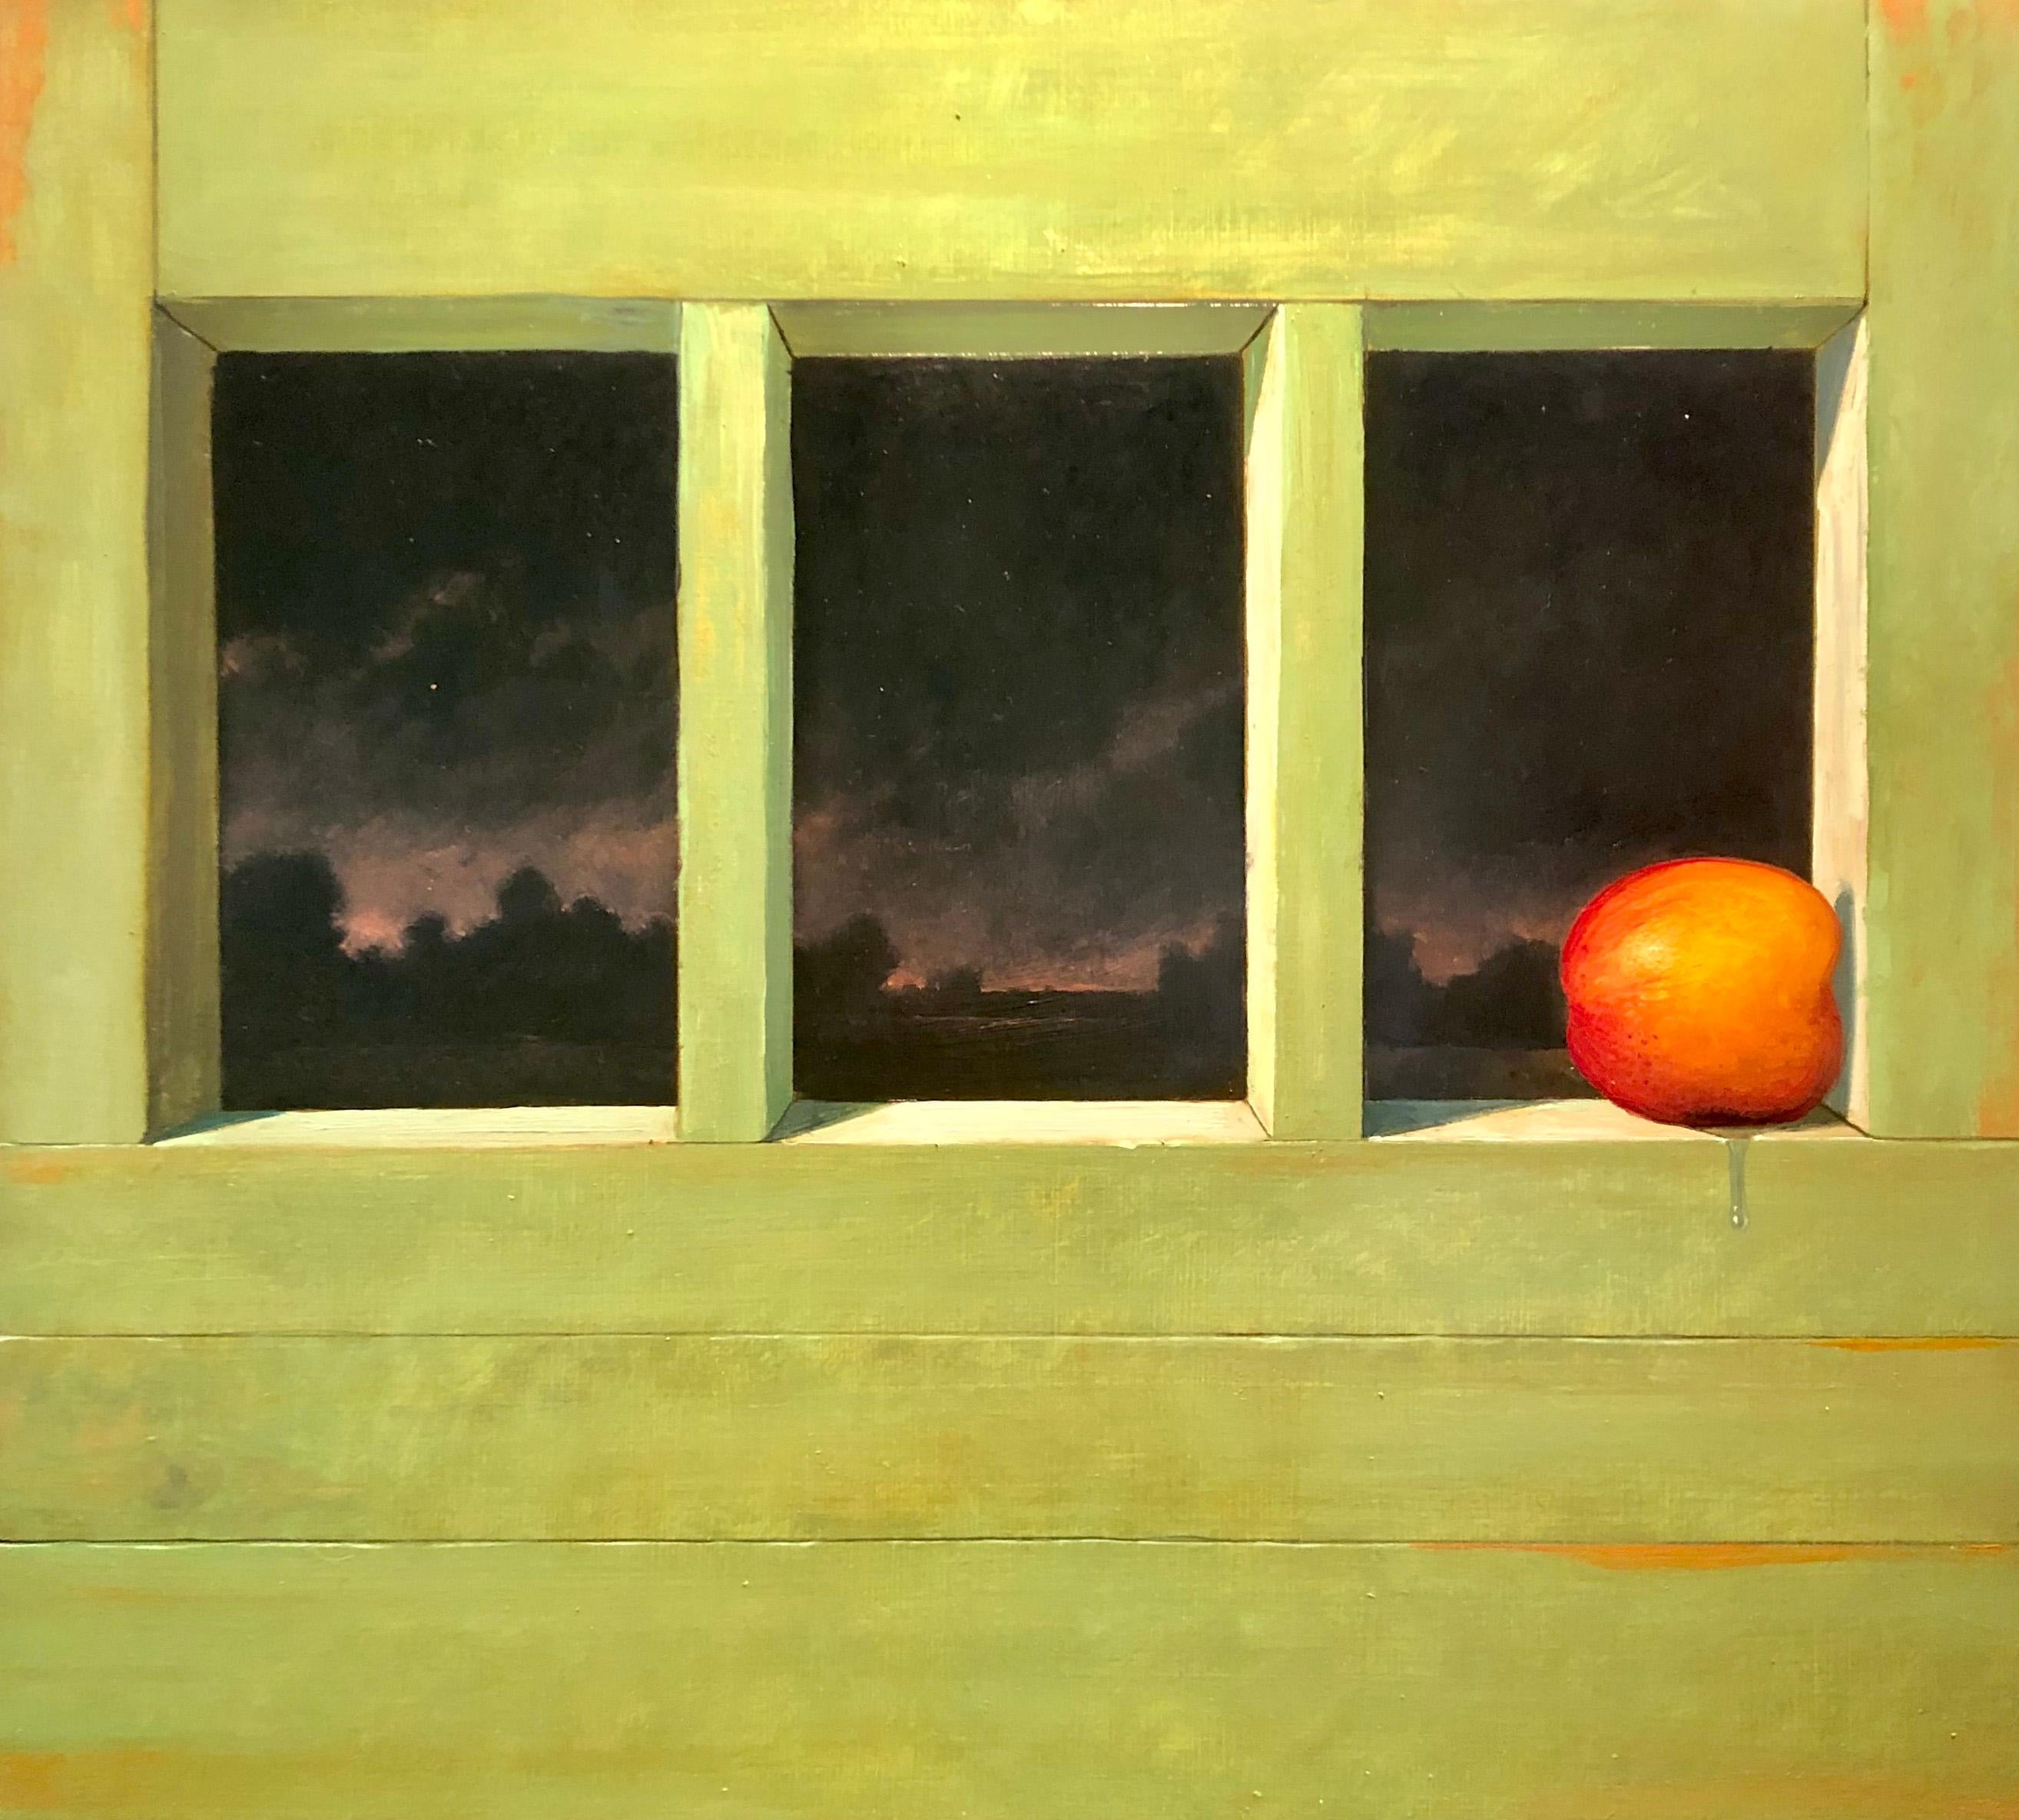 The Overripe Peach Looked Wistfully Toward the City... - Realist Painting by Eric Forstmann